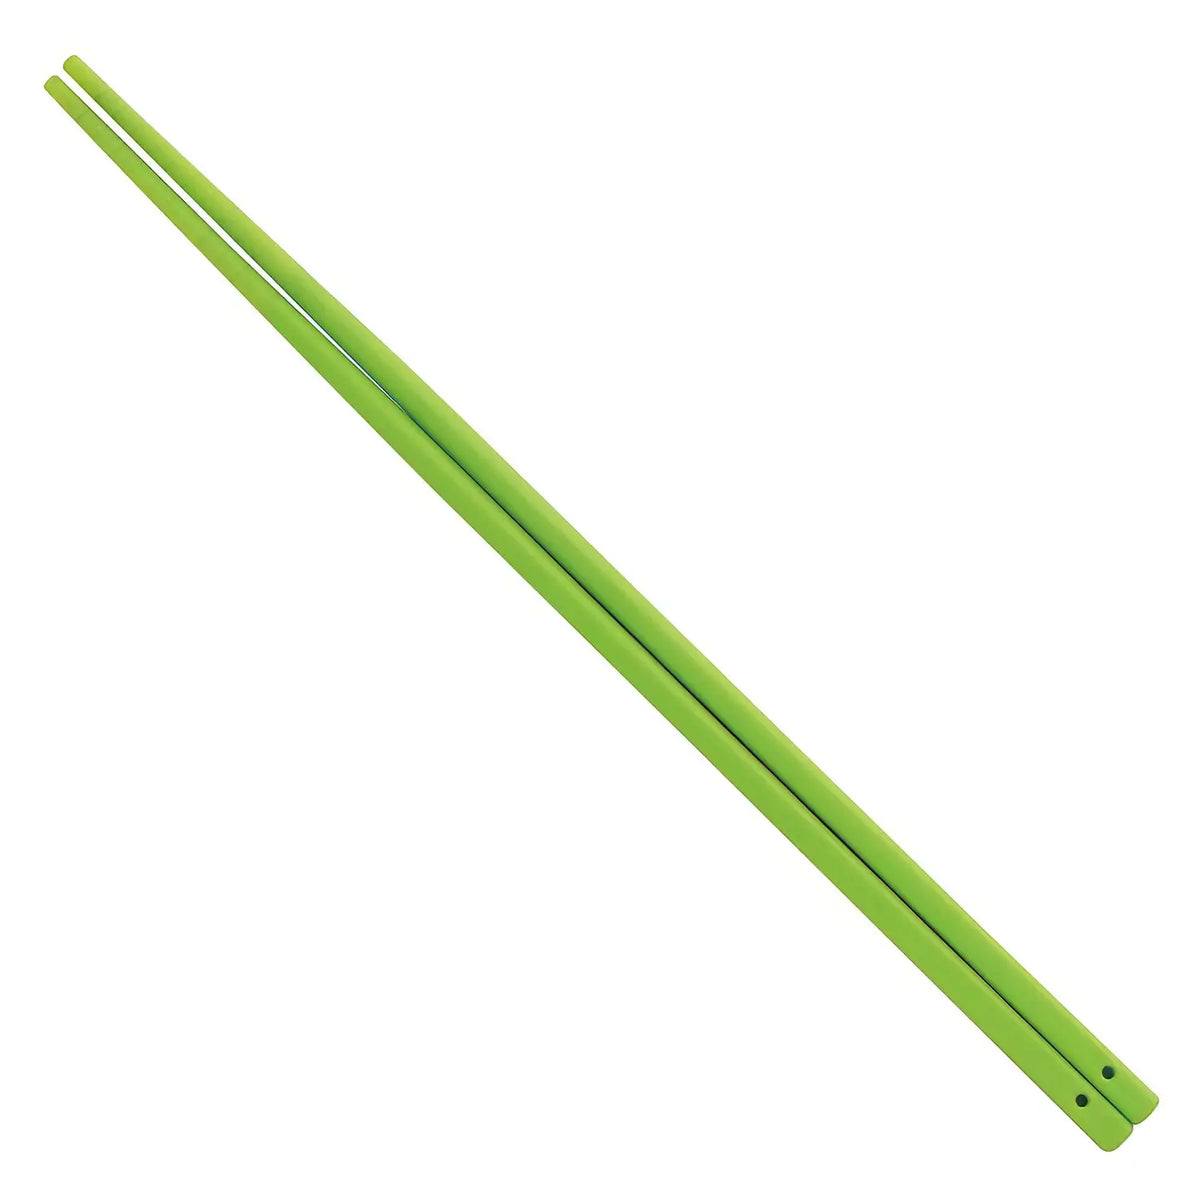 Yaxell Silicone Cooking Chopsticks